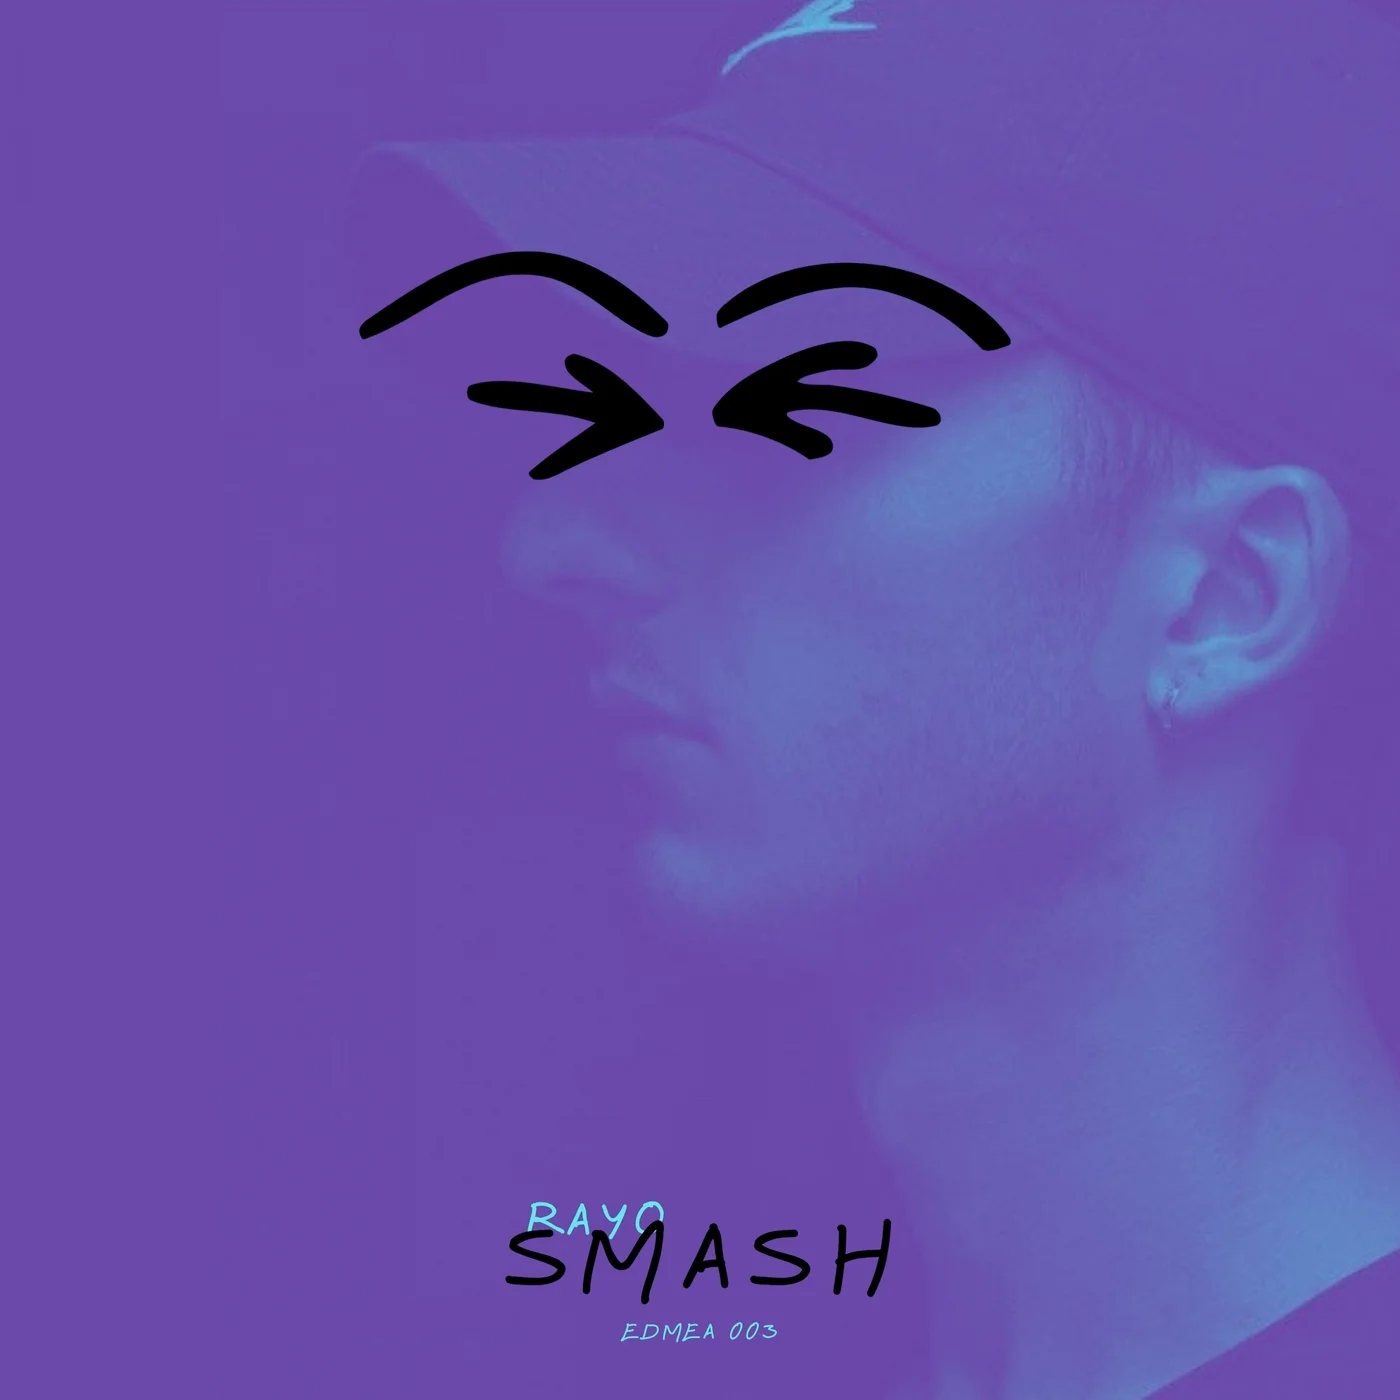 Edmea Records introduces “Smash EP” by Rayo